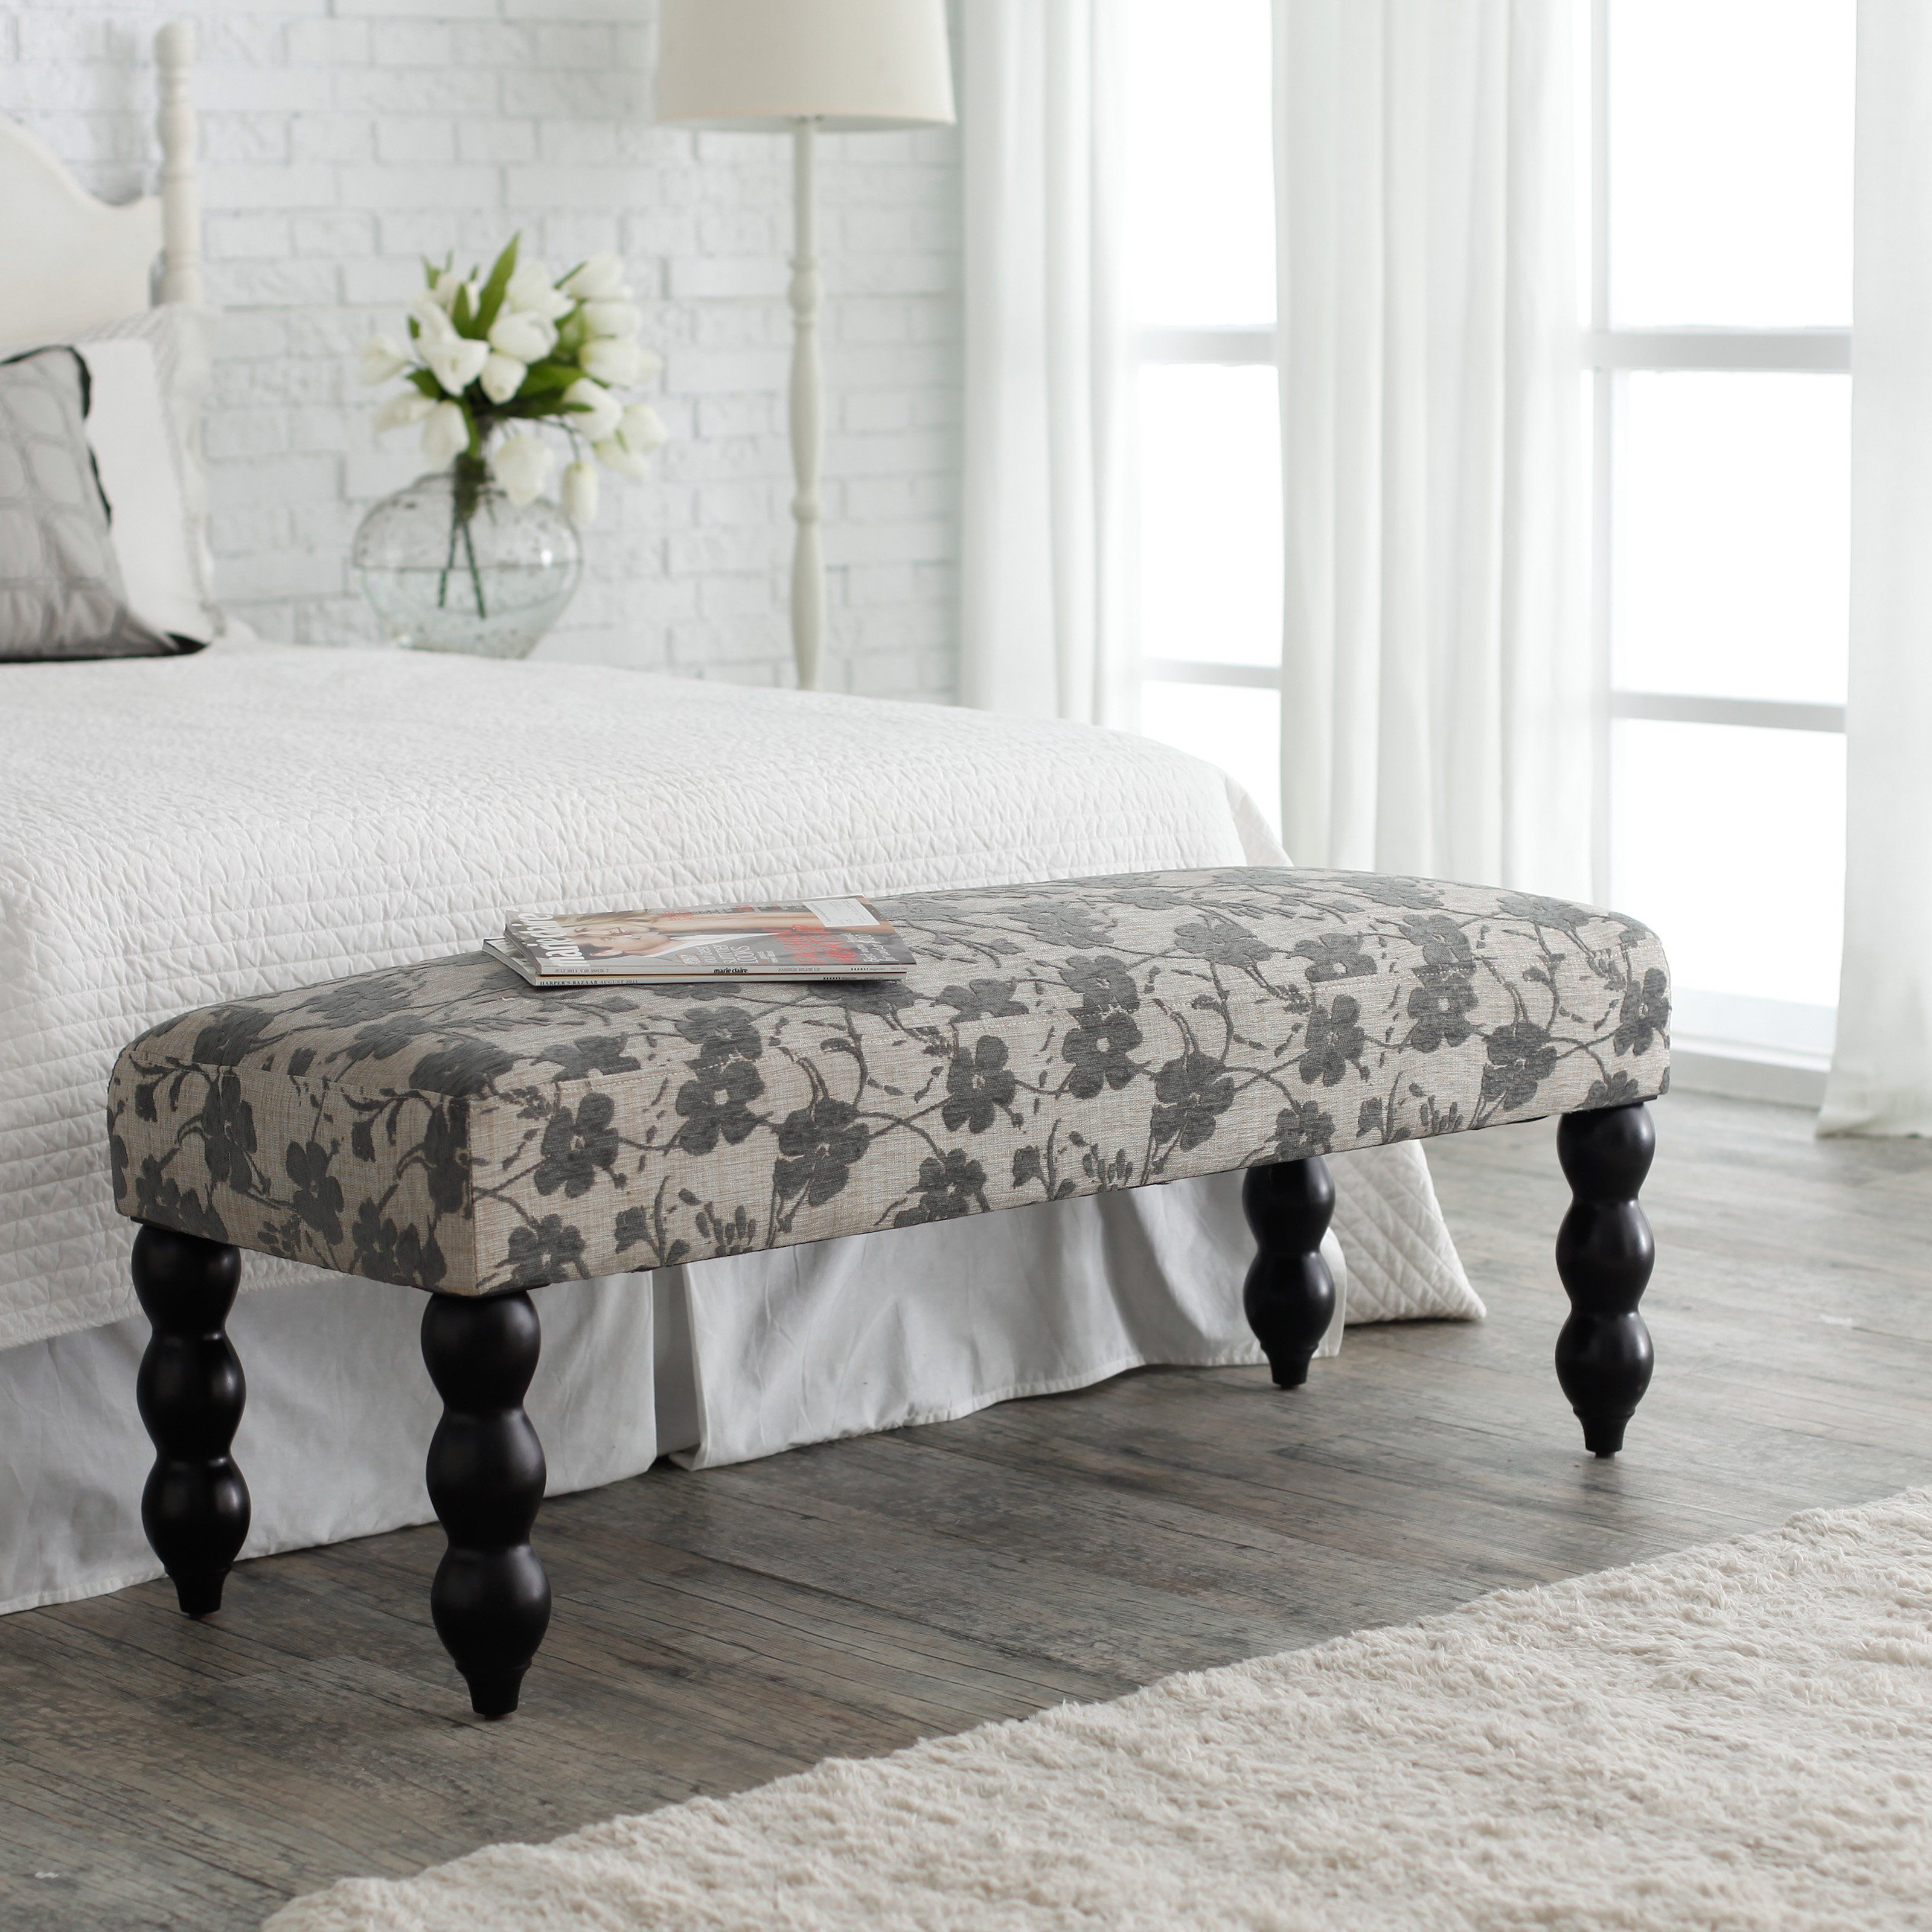 Reinventing Your Bedroom With An Upholstered Bench